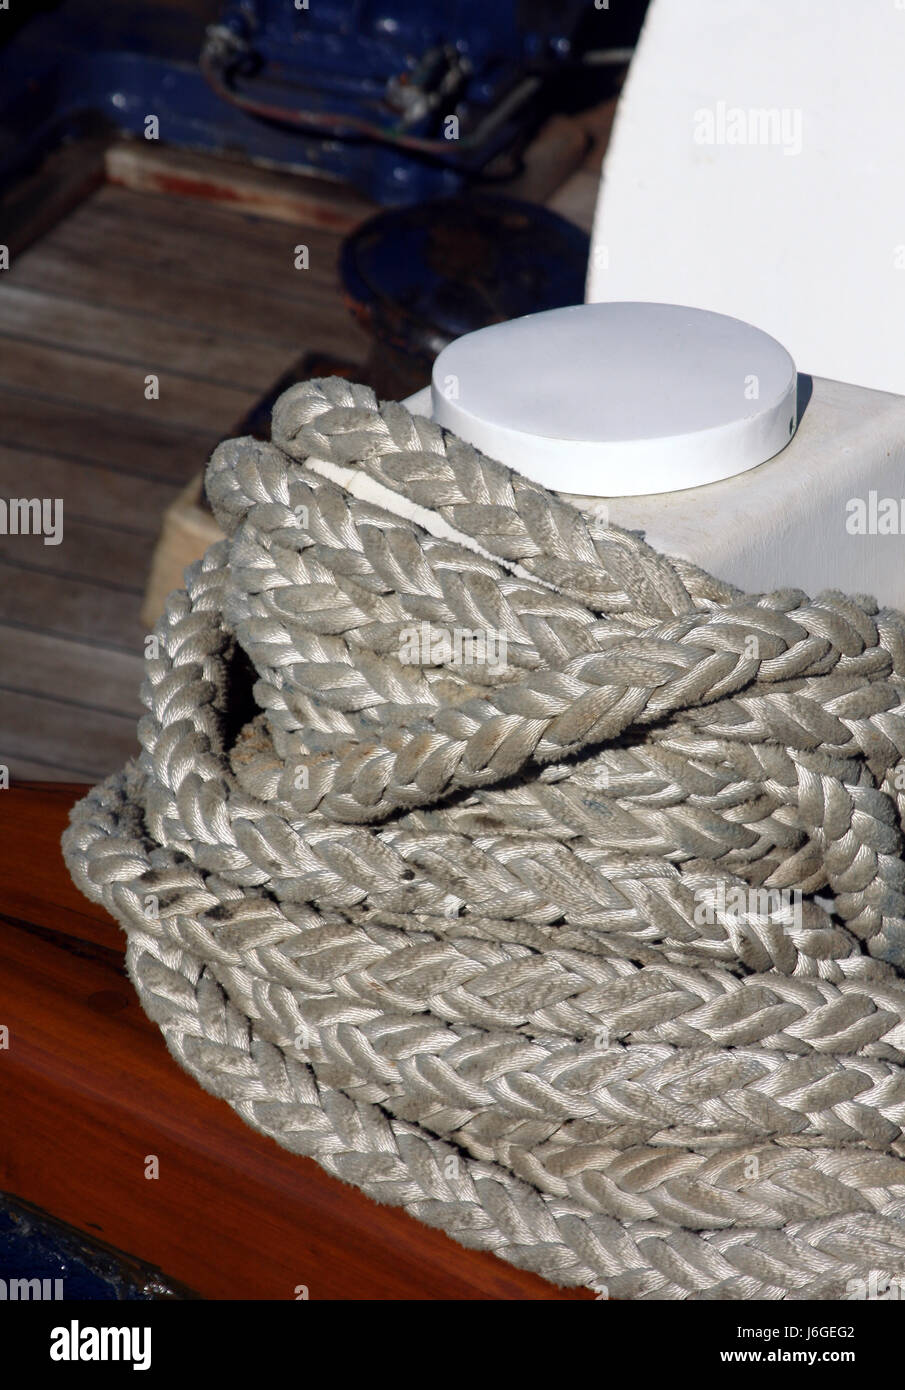 navigation dew leash clew rope rowing boat sailing boat sailboat boat Stock Photo